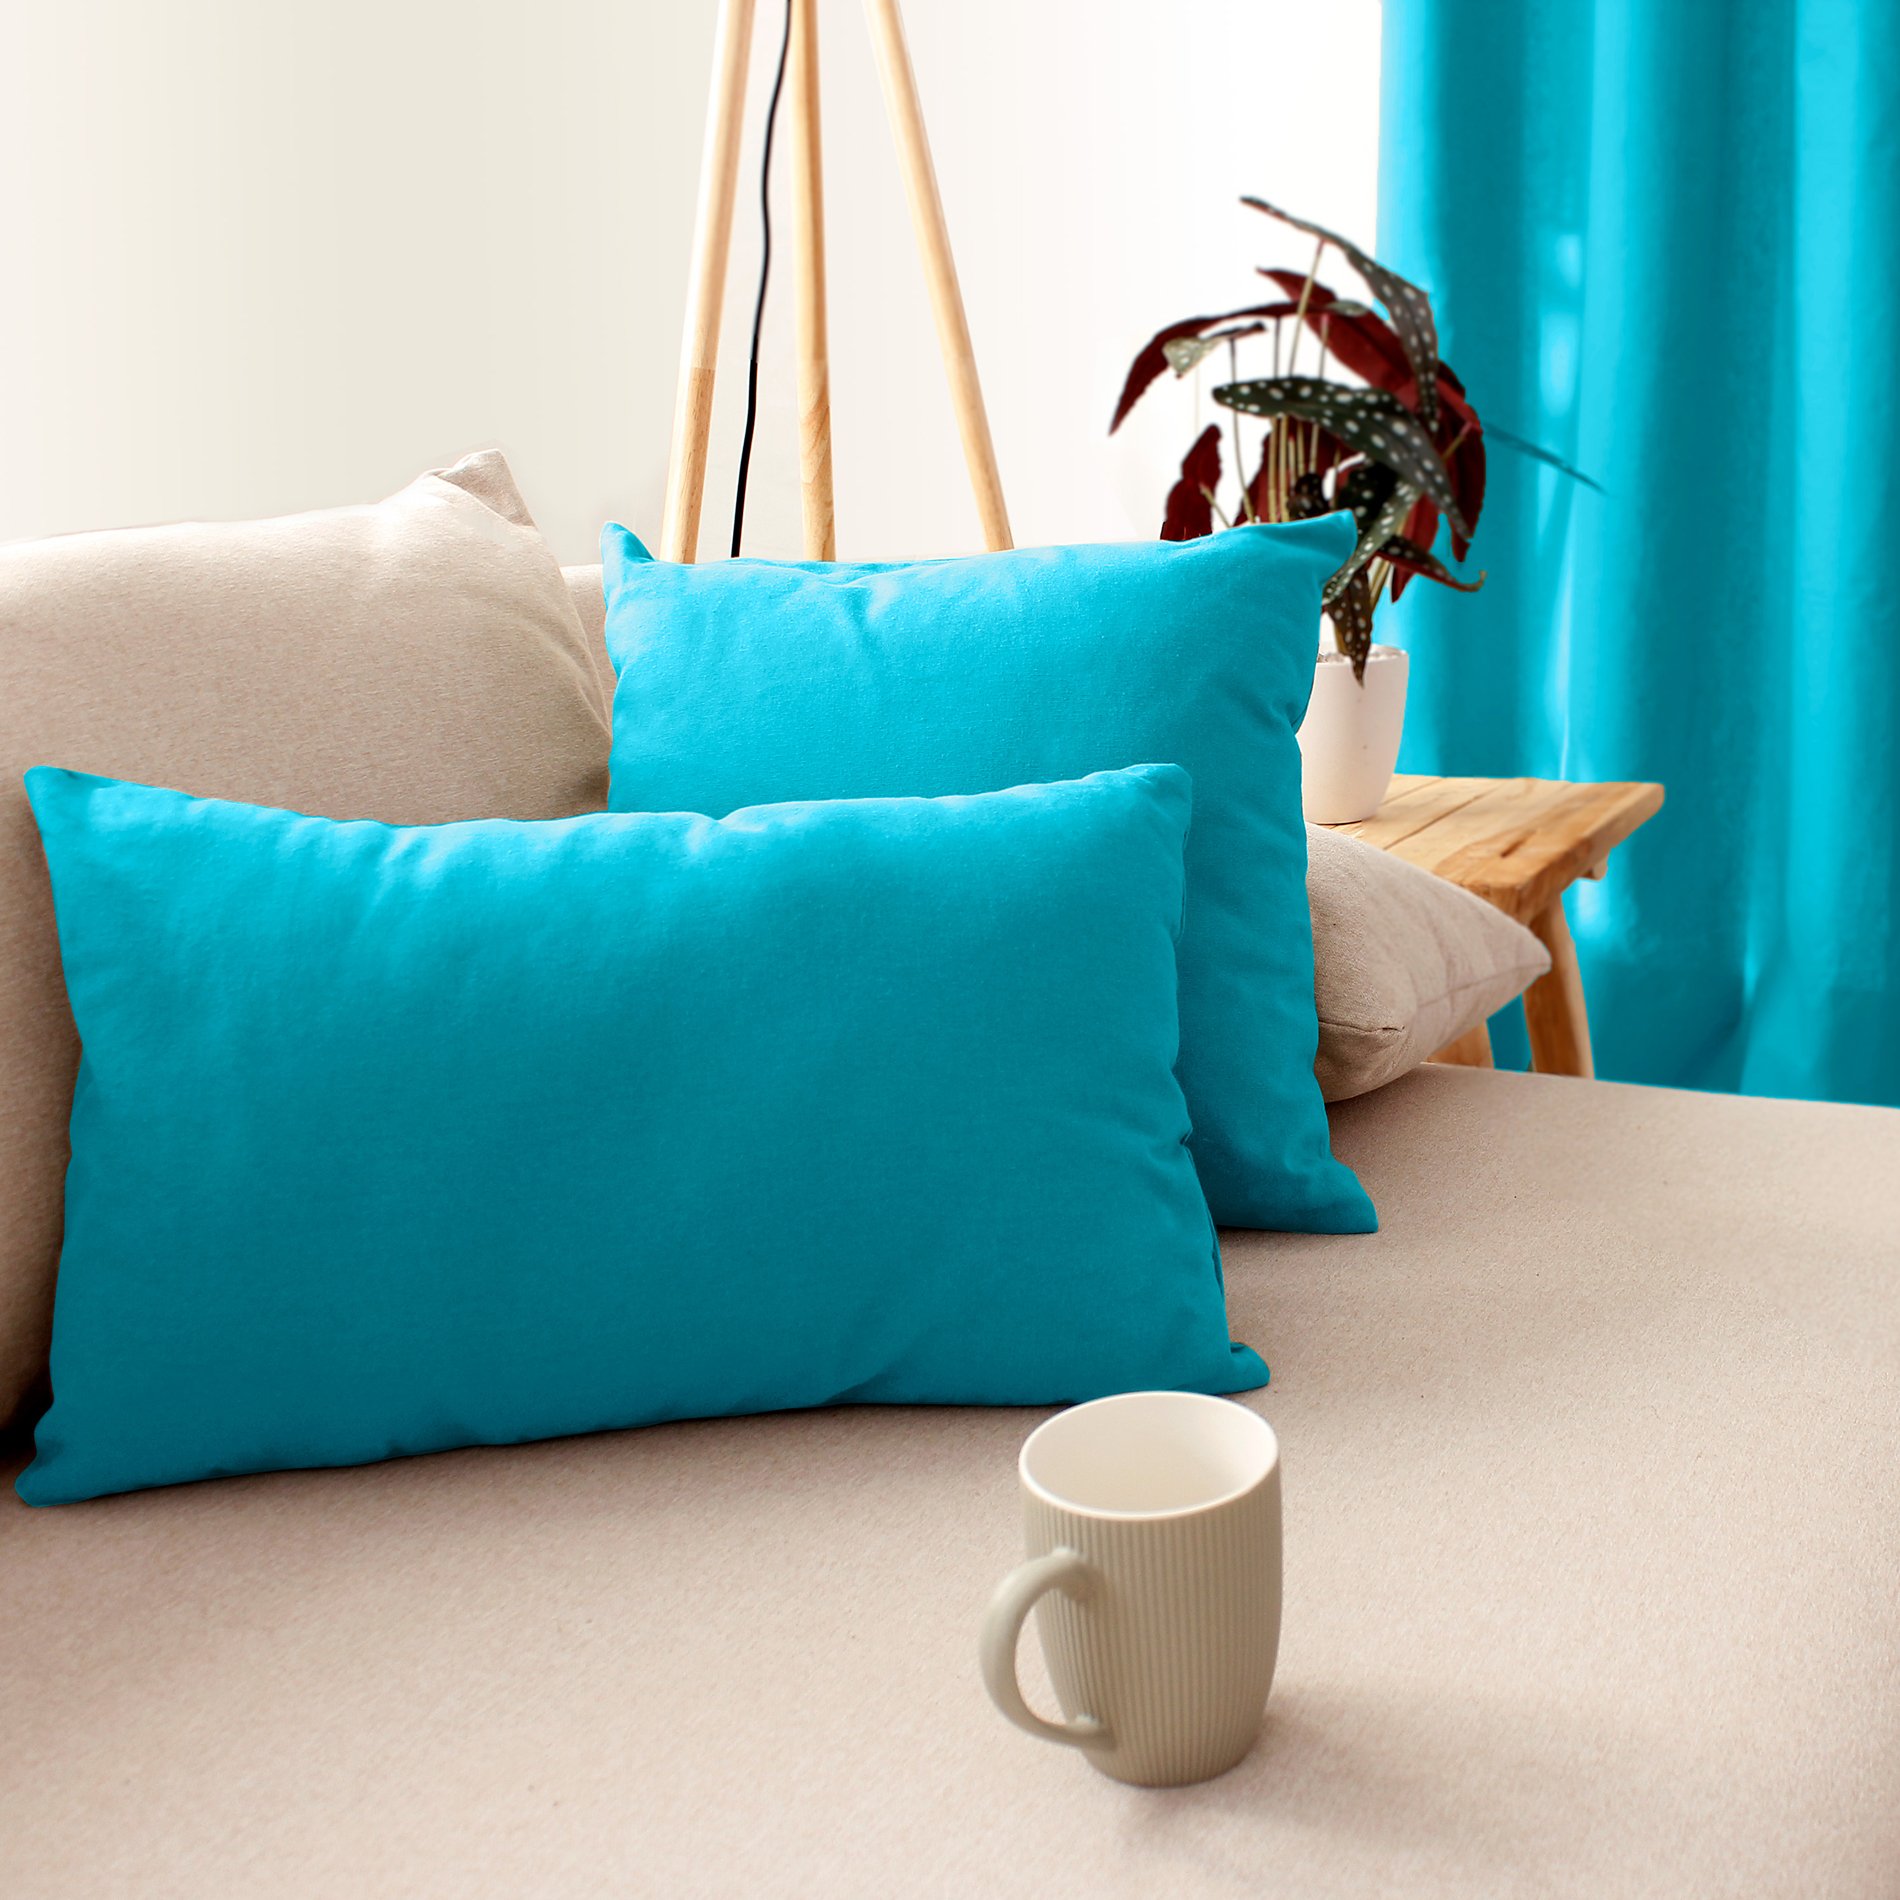 Coussin gonflable turquoise